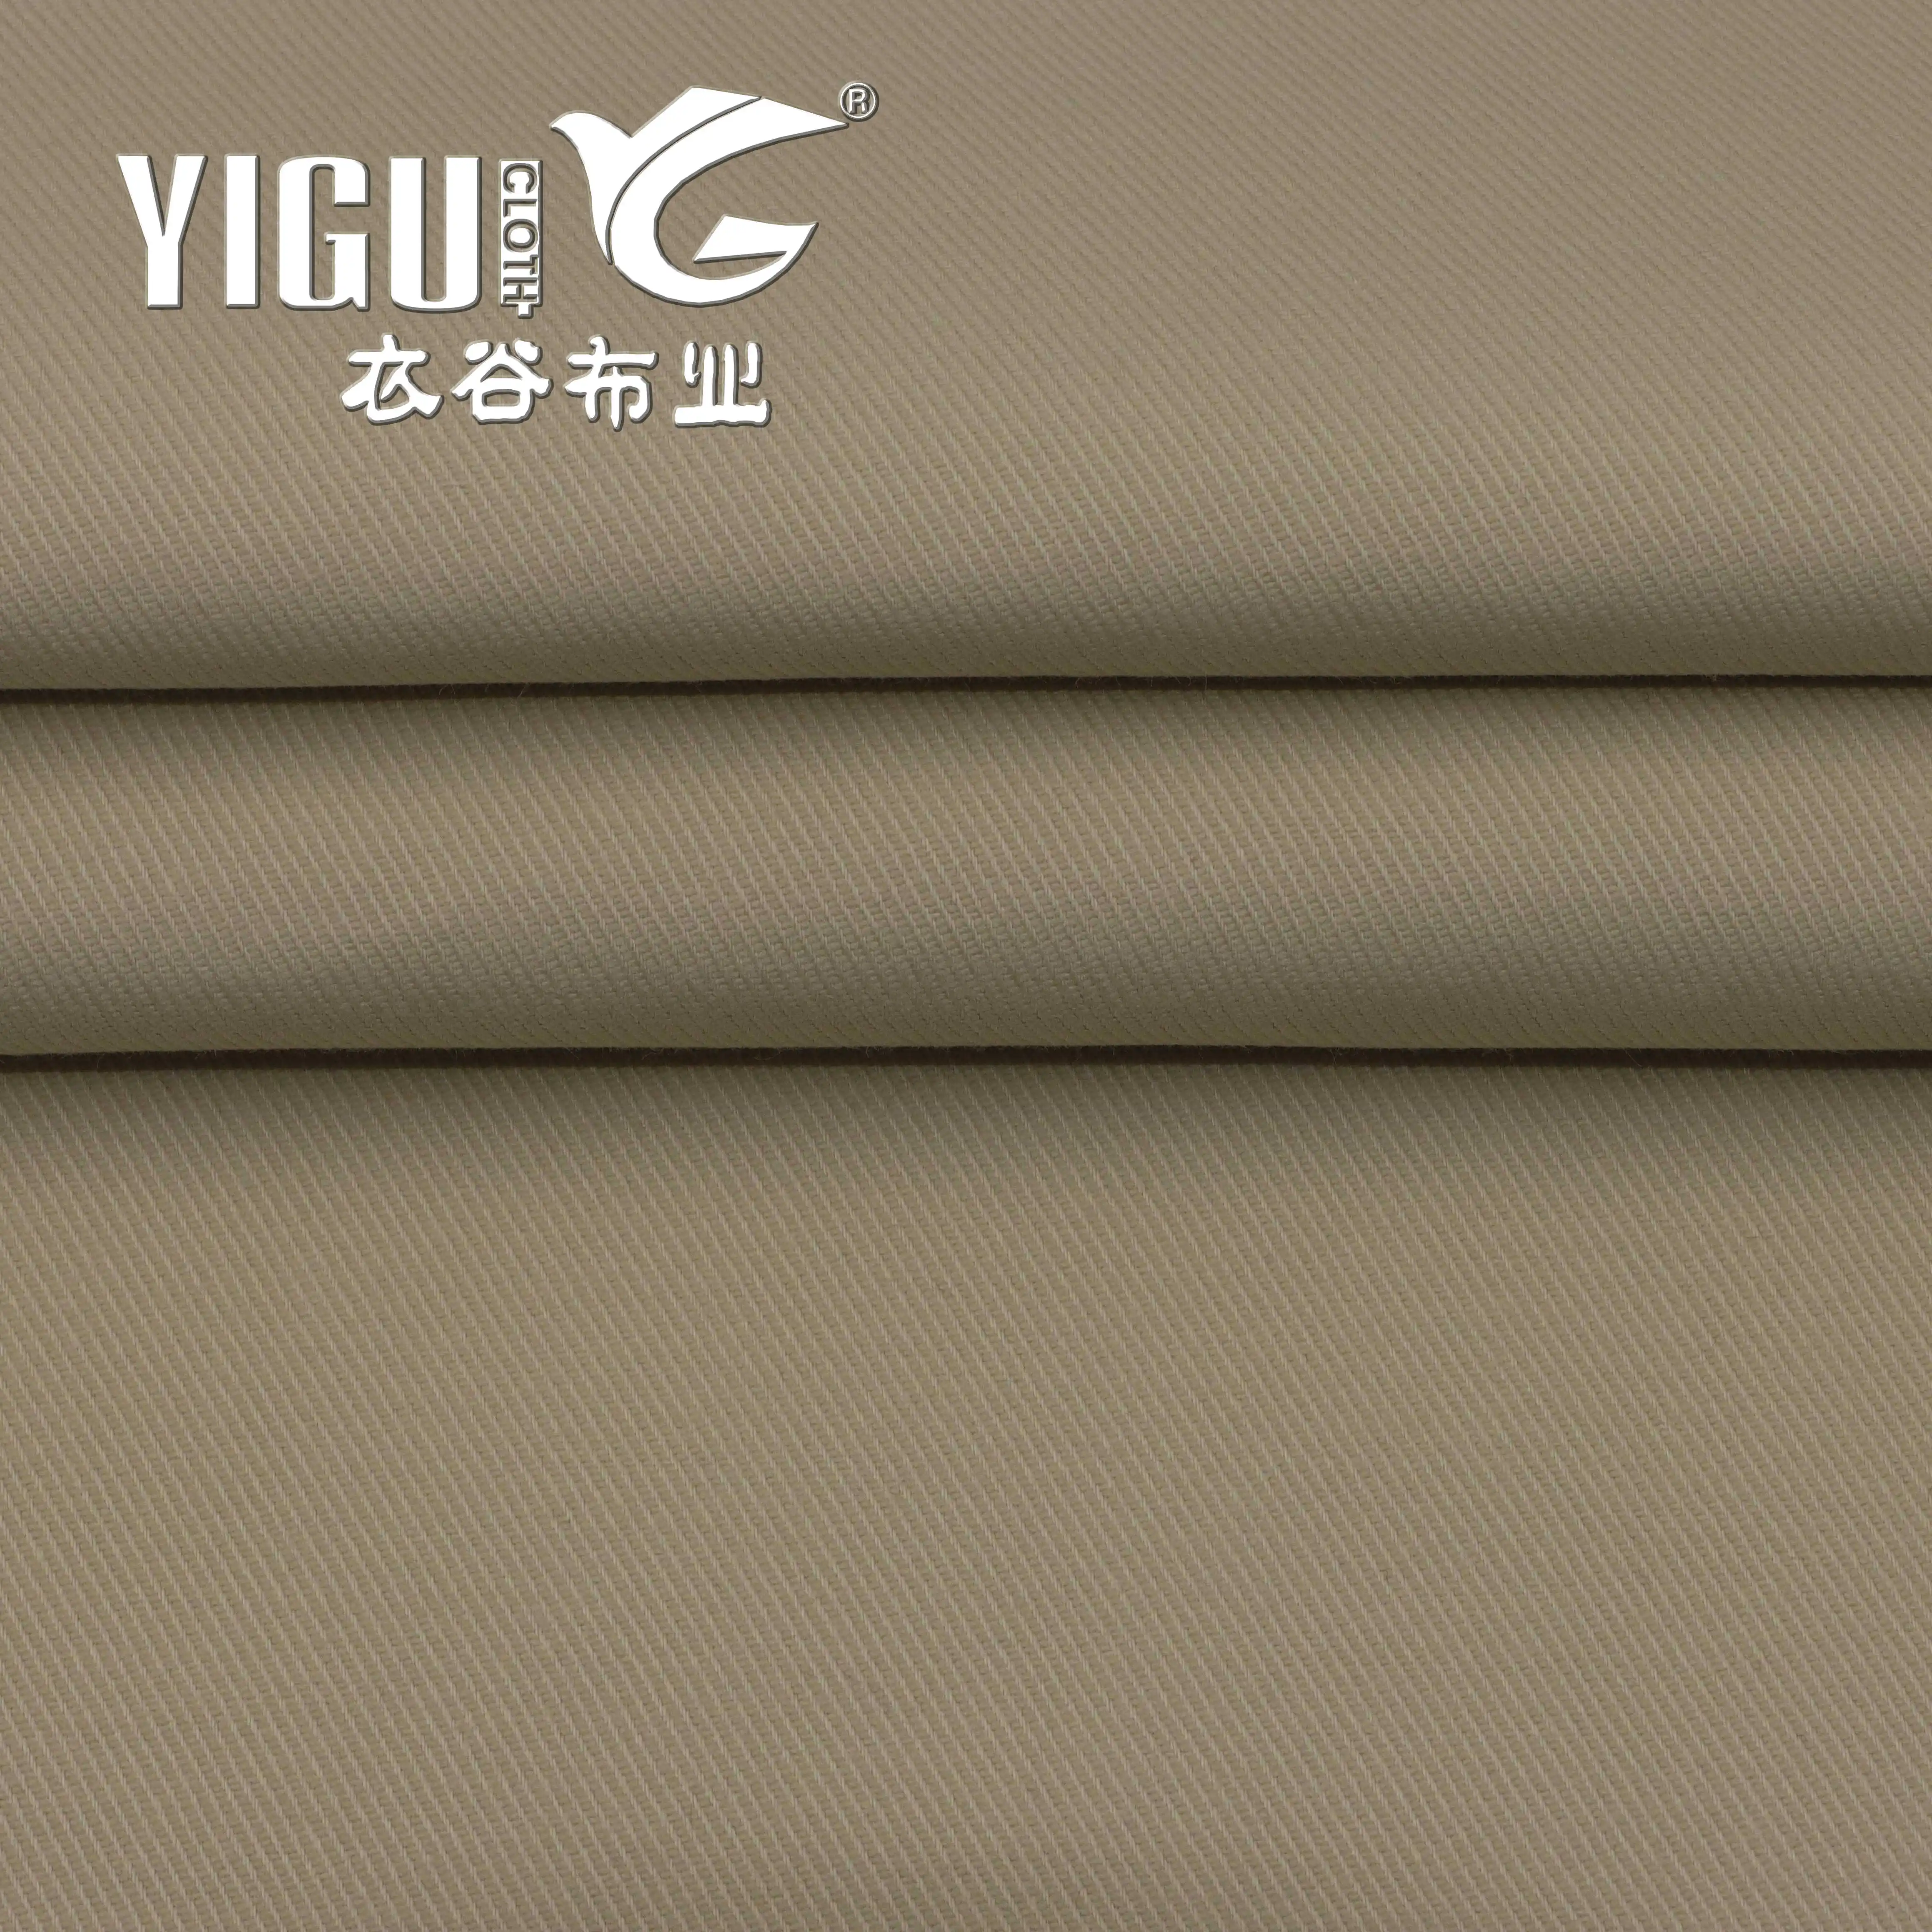 Dyed 16*12+70D 100*54 Spandex Cotton Ripstop Fabric twill cotton spandex fabric